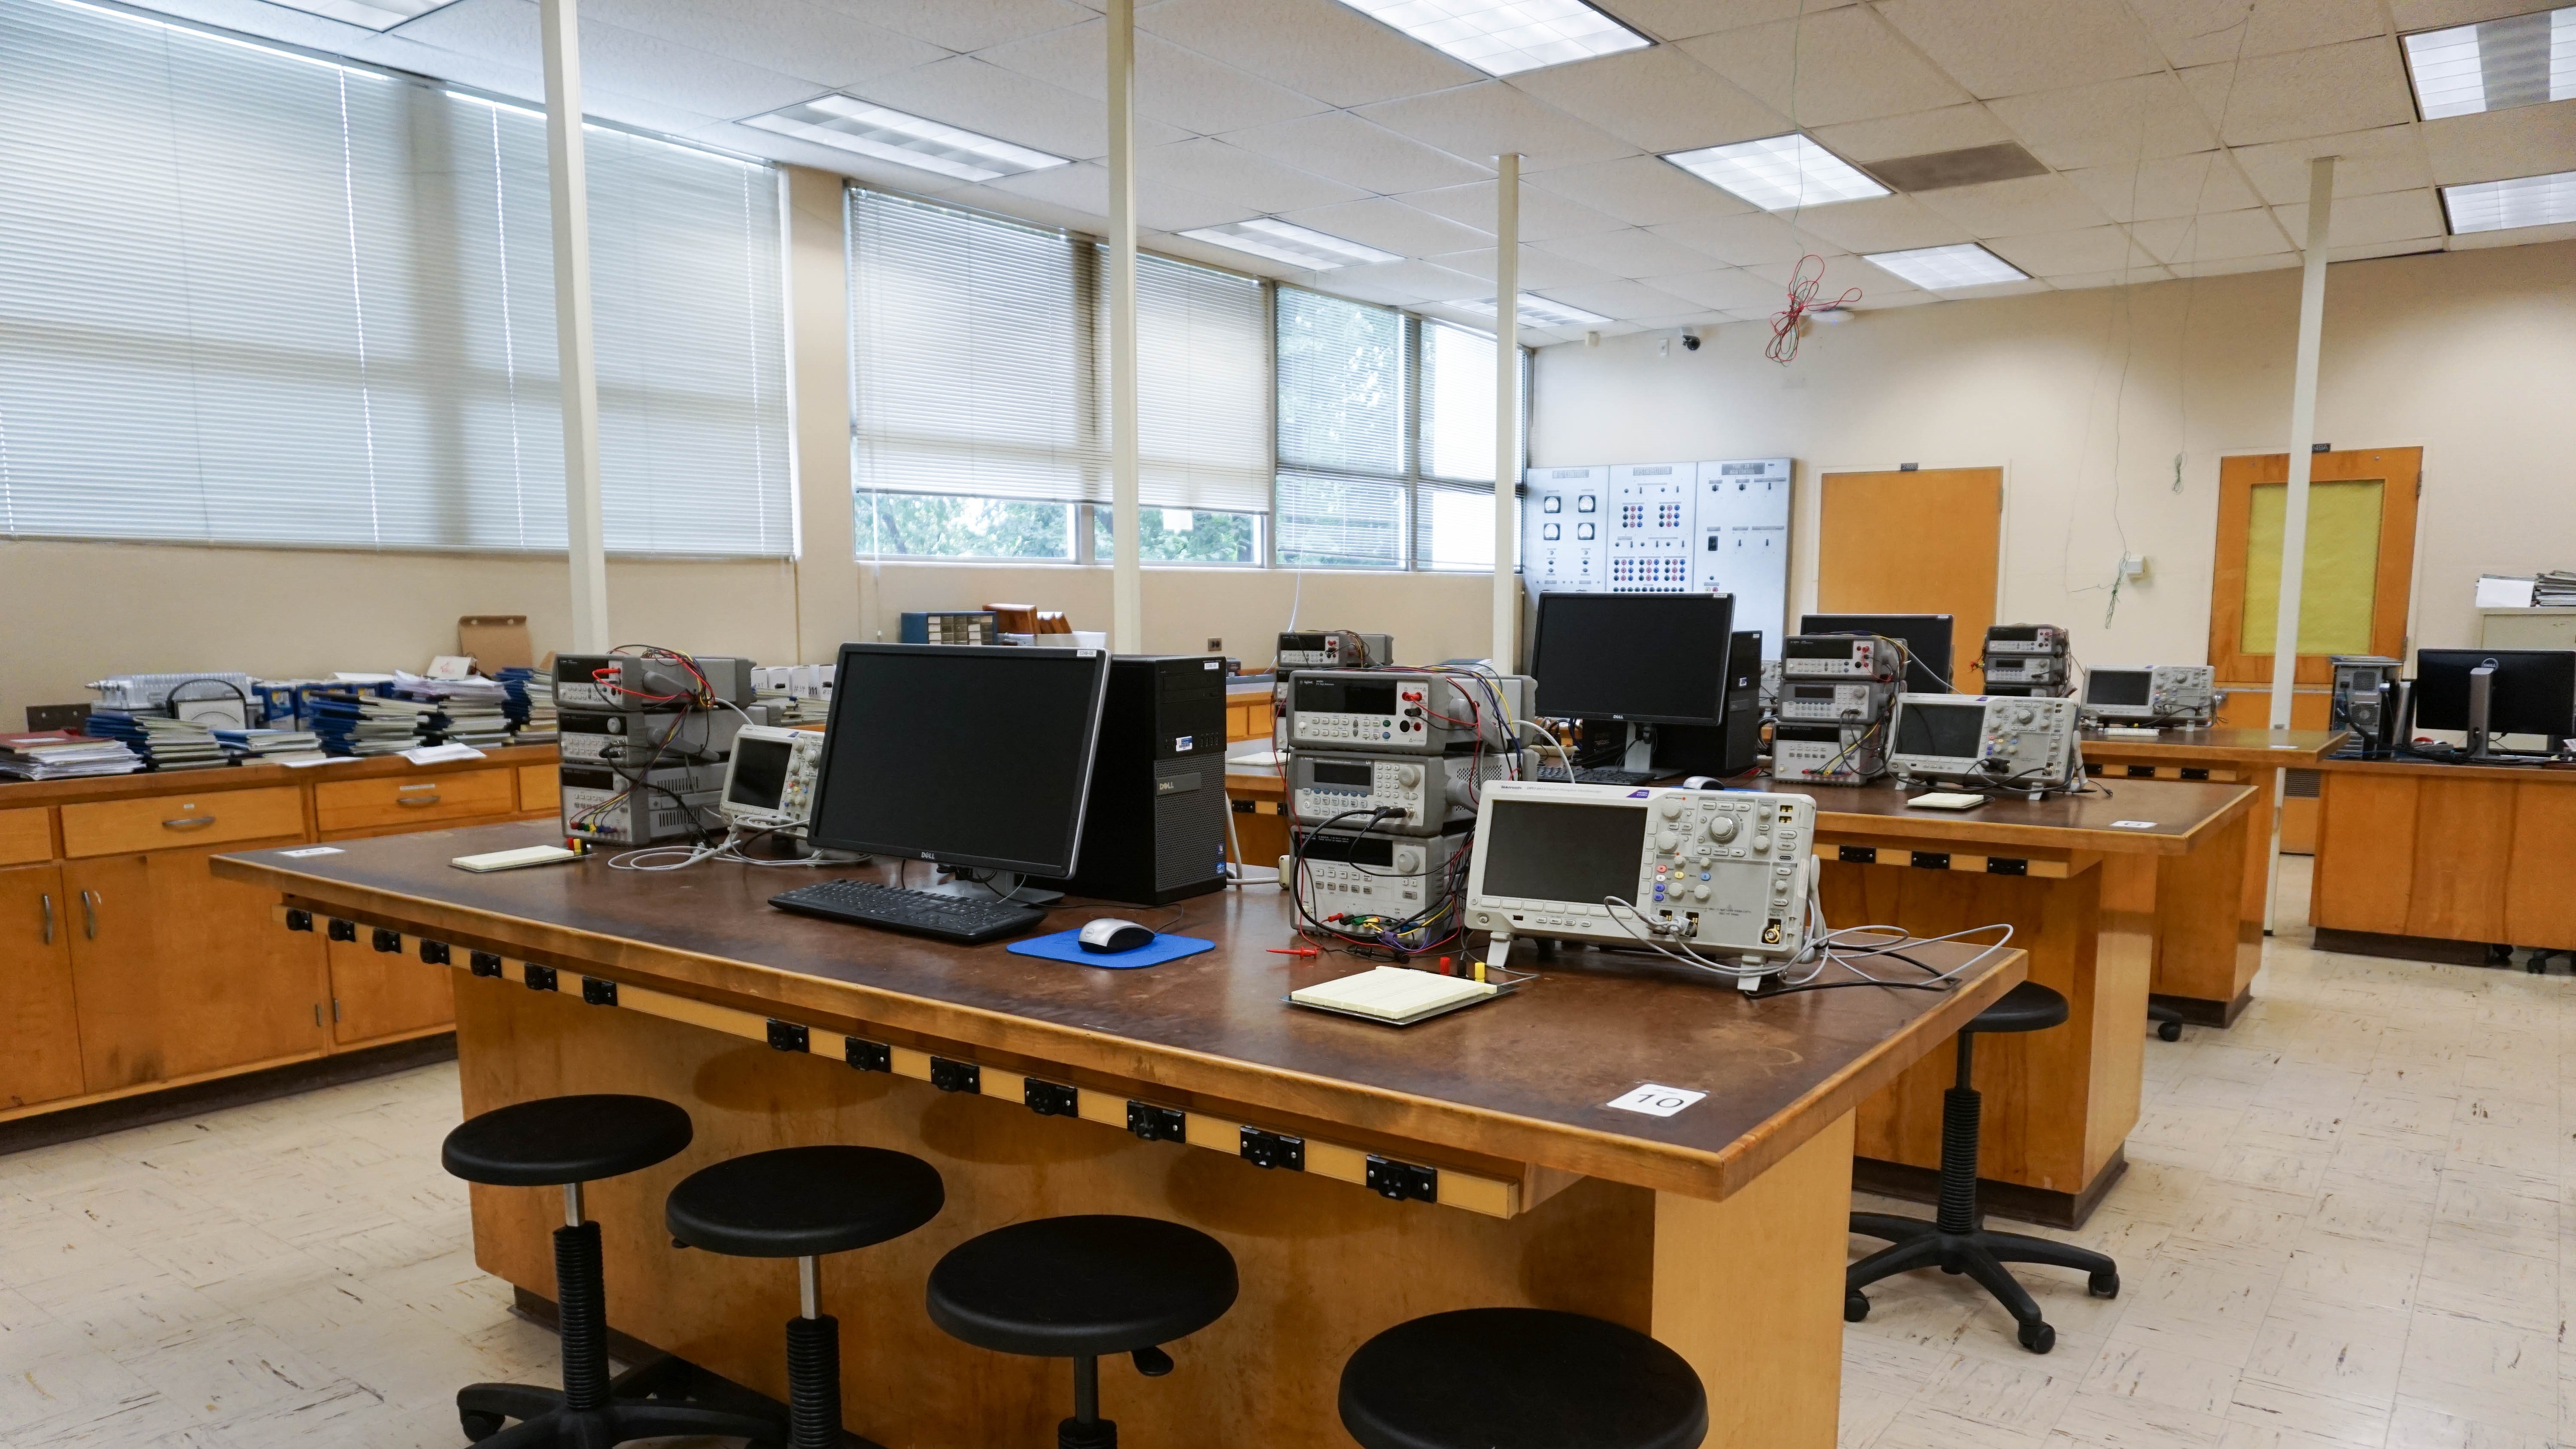 One of the lab's wooden desk with four stools for students to work with the equipment.